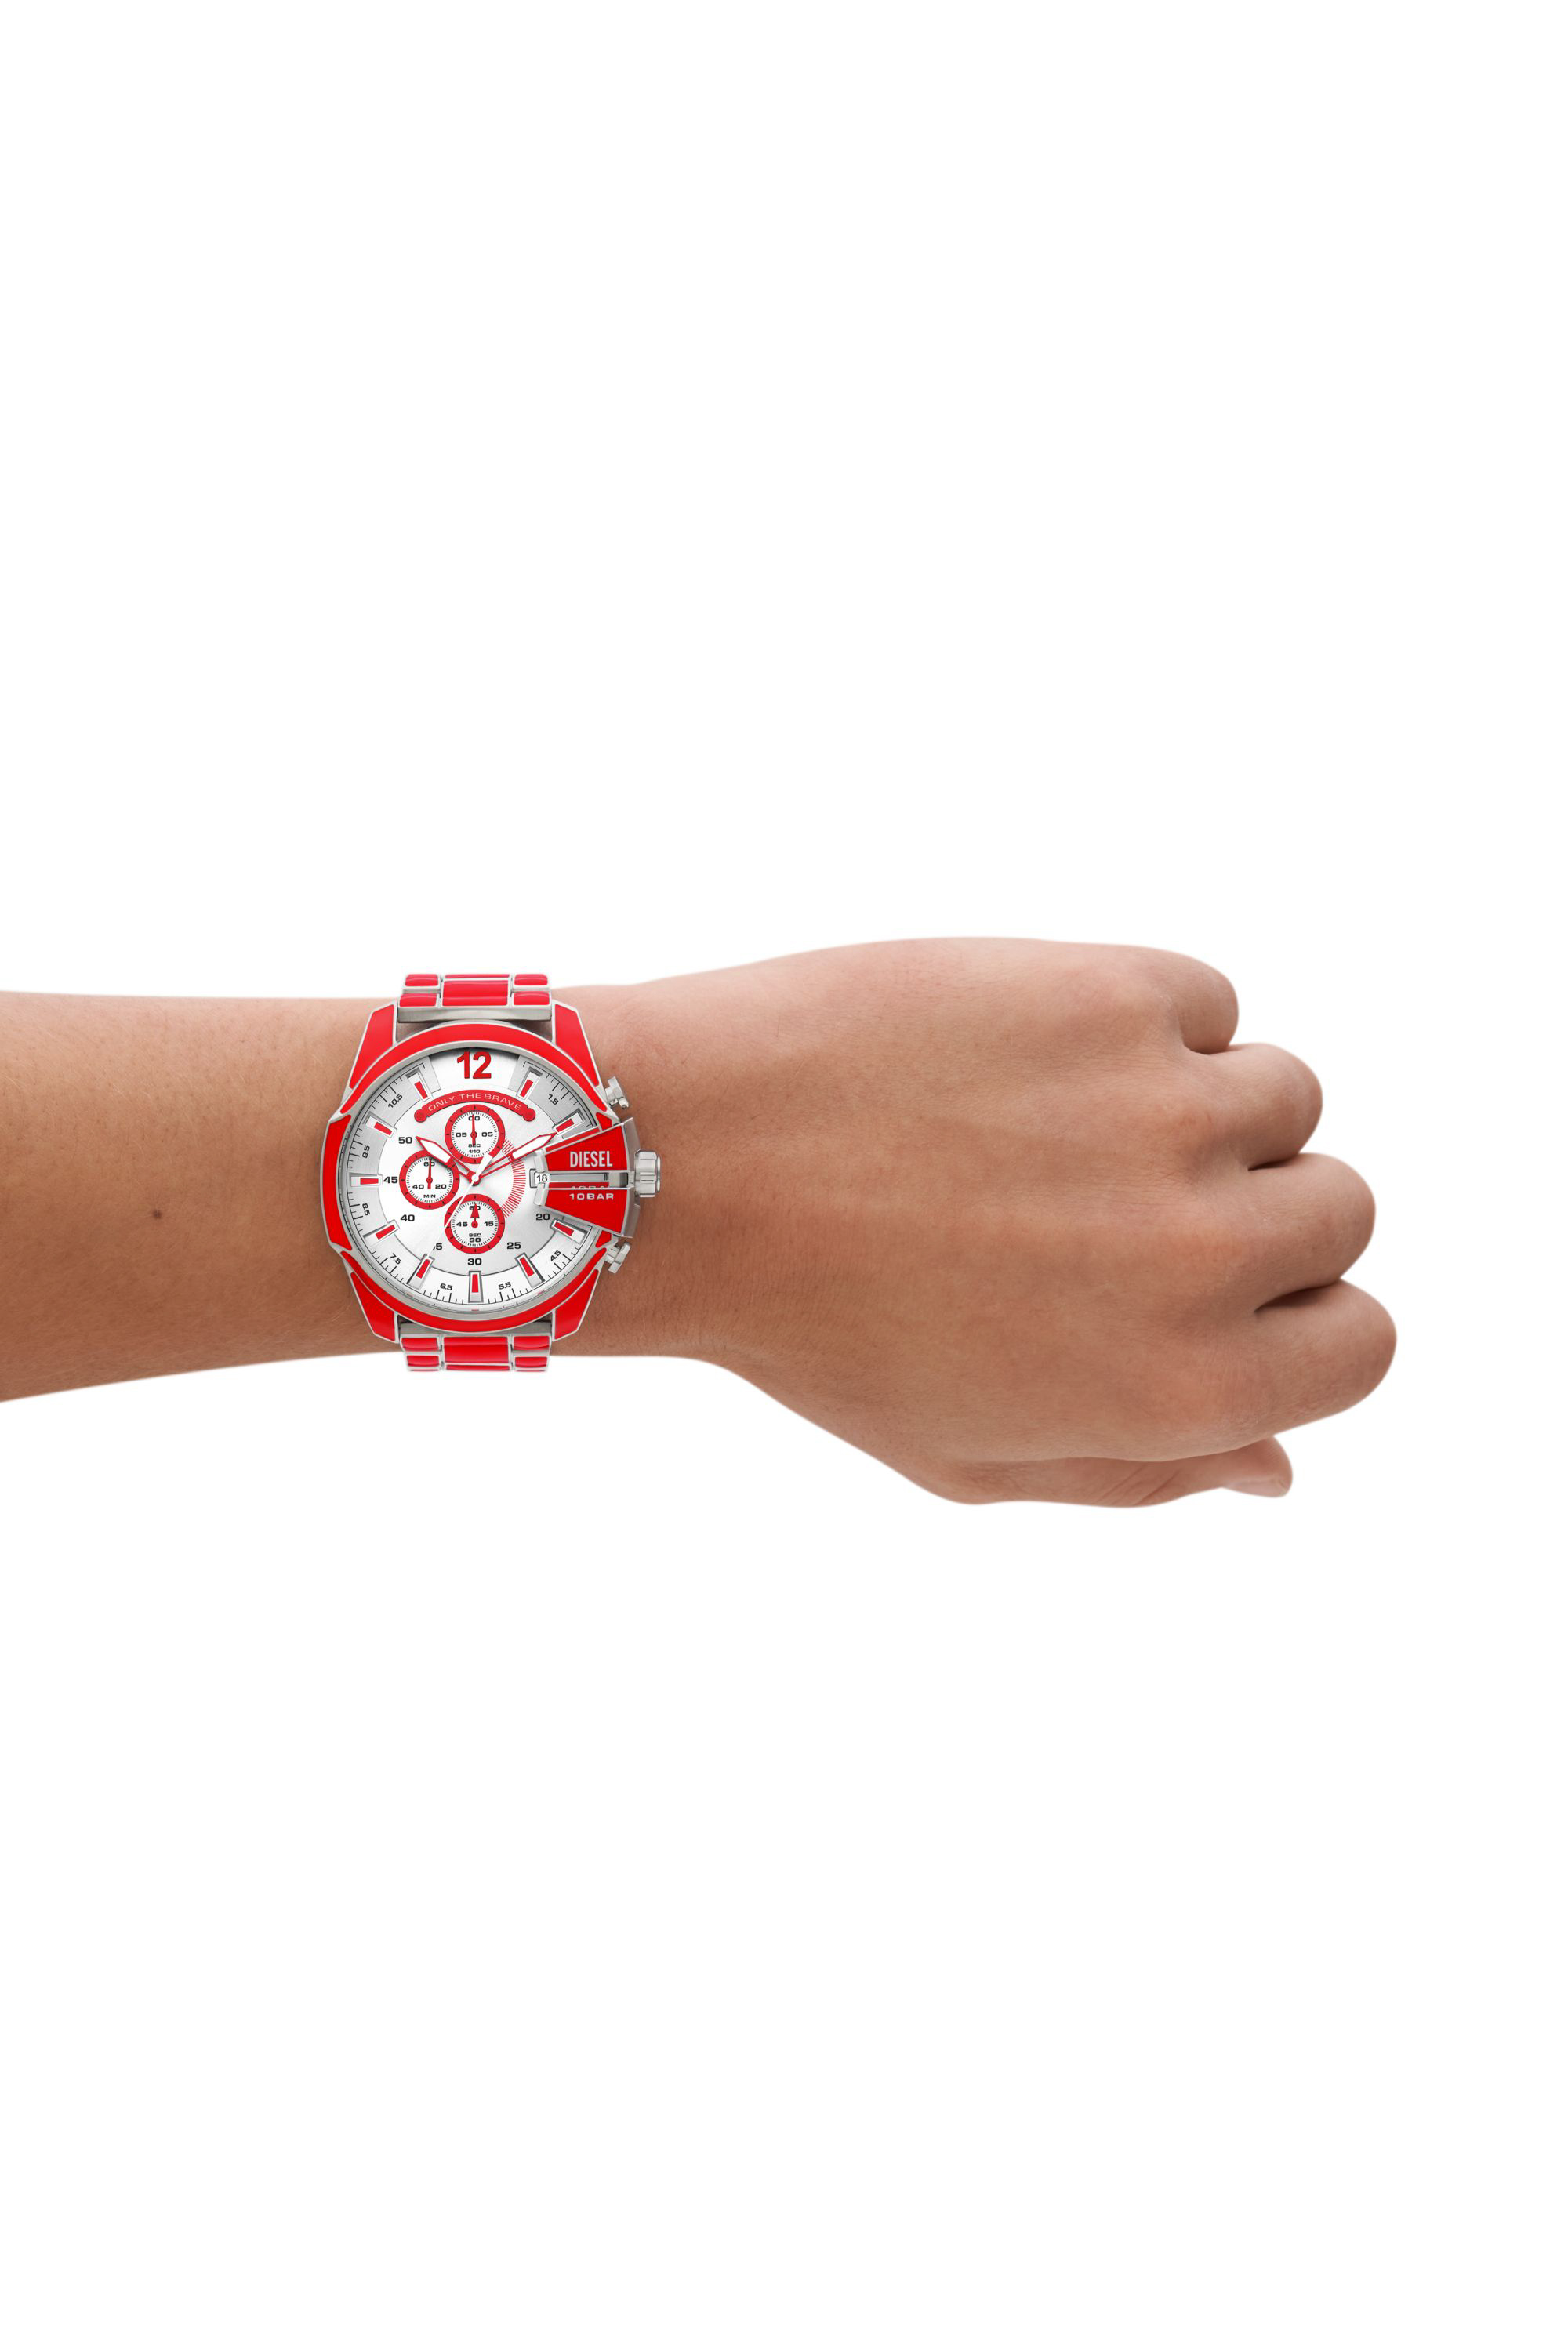 Diesel - DZ4638, Male Mega Chief red enamel and stainless steel watch in Red - Image 4